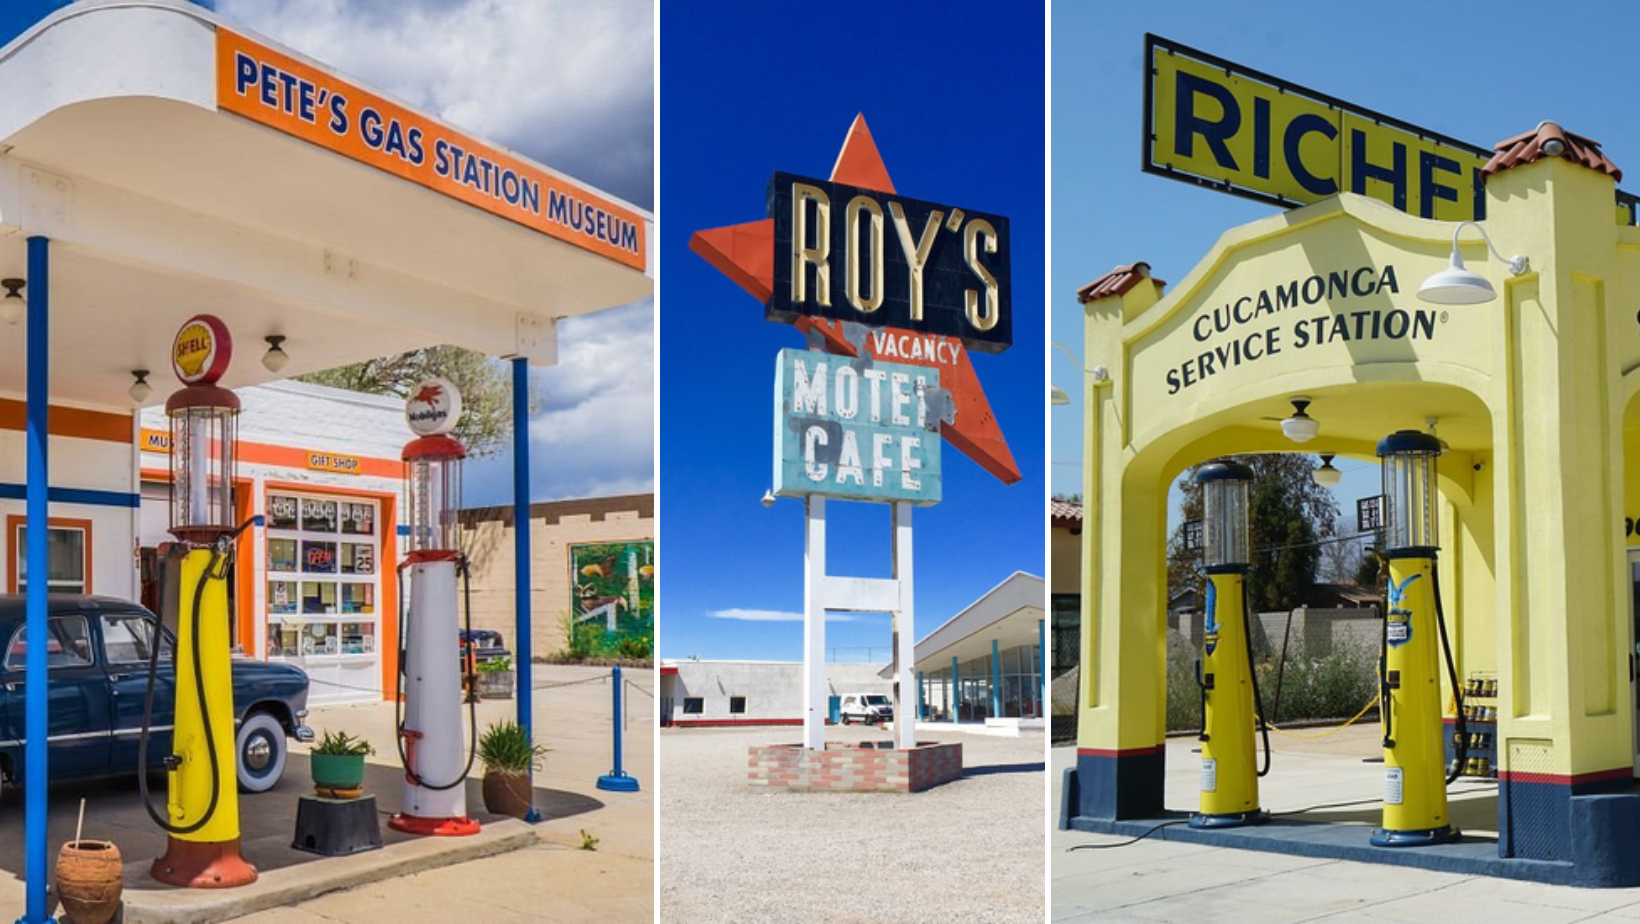 <p>There are attractions for everyone on America's historic Route 66. Some people love the charming motels, some like the diners and cafes, and some love the endless scenery. But there's one other common roadside site that people love: vintage filling stations.</p><p>Route 66 is littered with historic gas stations, and many have been restored, turned into museums or attractions, and even designated historical sites. Here are some of the most popular filling stations that give big Americana vibes.  </p>